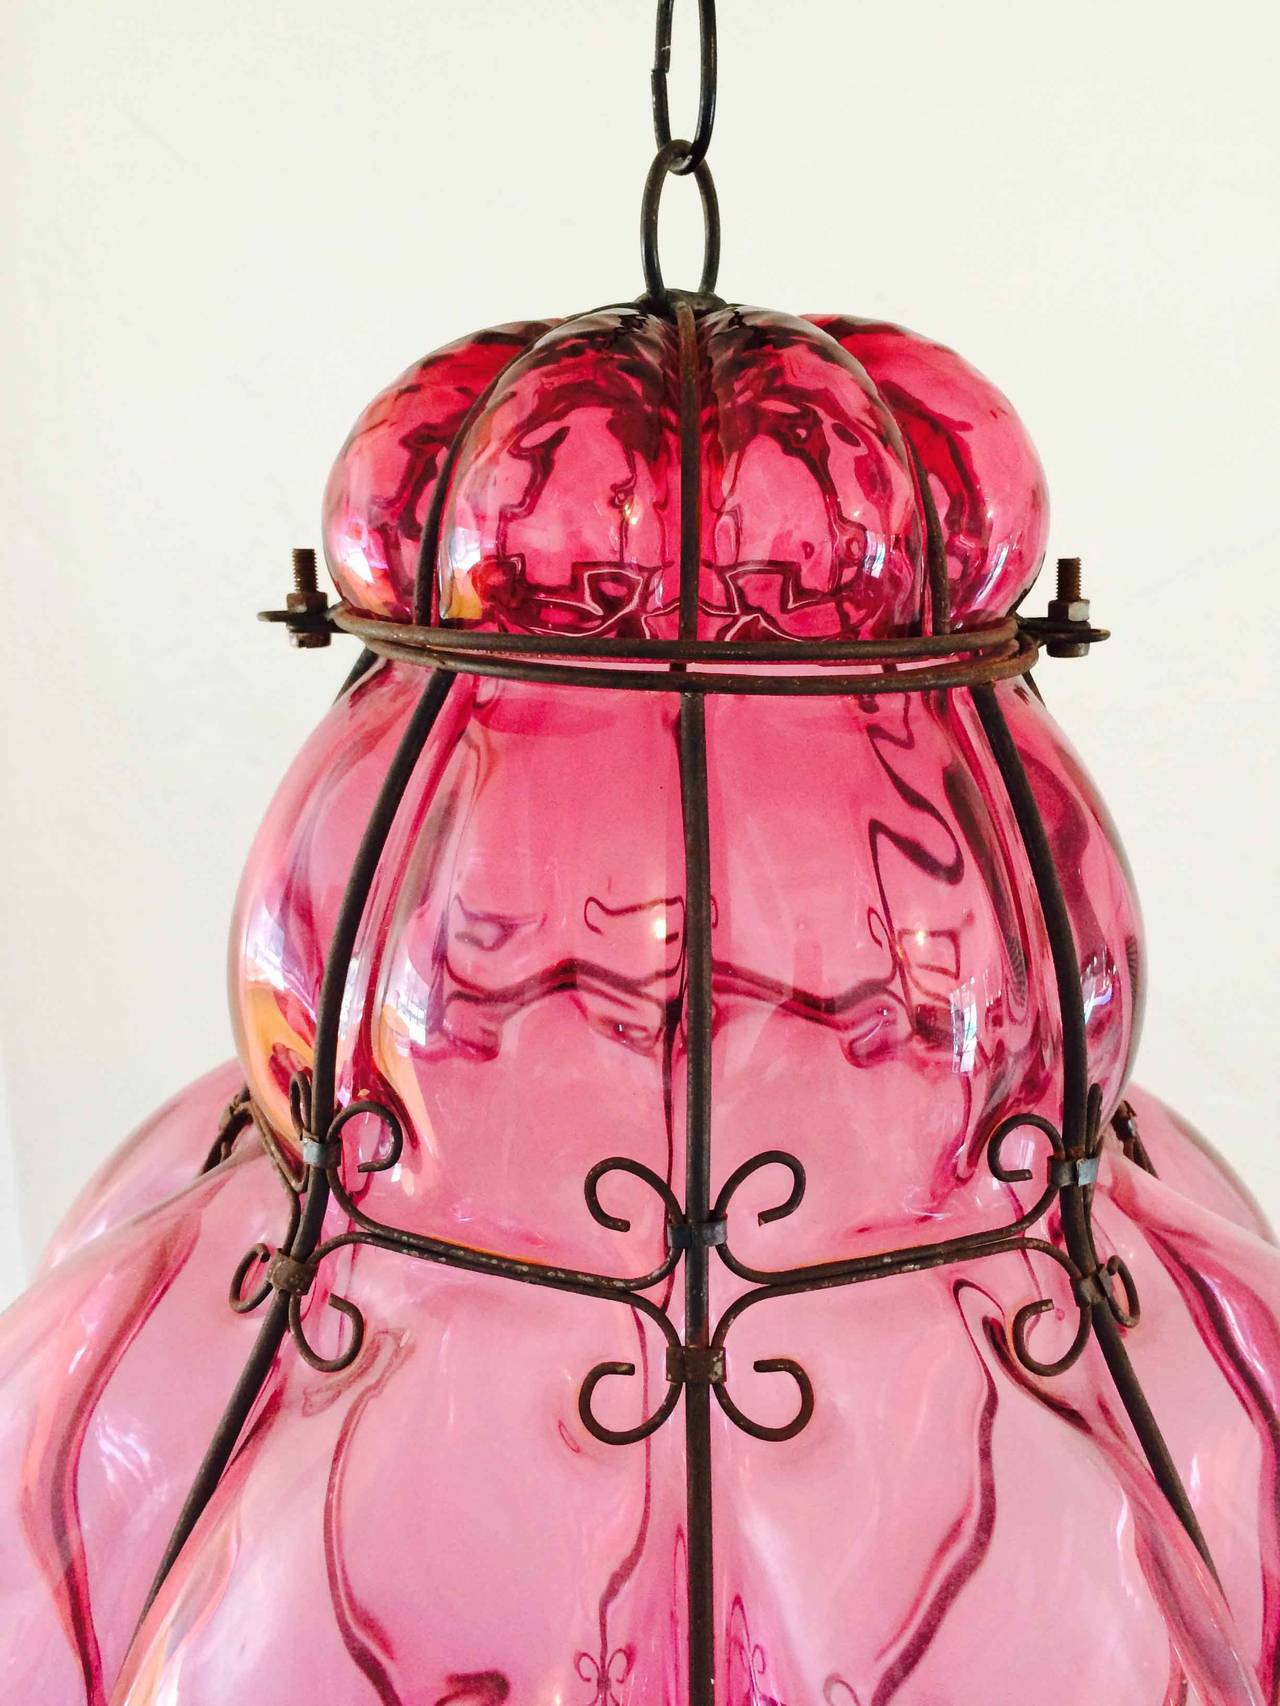 A fine caged Murano glass pendant hanging lantern. Translucent cranberry handblown glass item caged in a black lacquered metal. Top unhinges to place or change candle etc. Item appears previously unused with original Murano foil label intact. Item